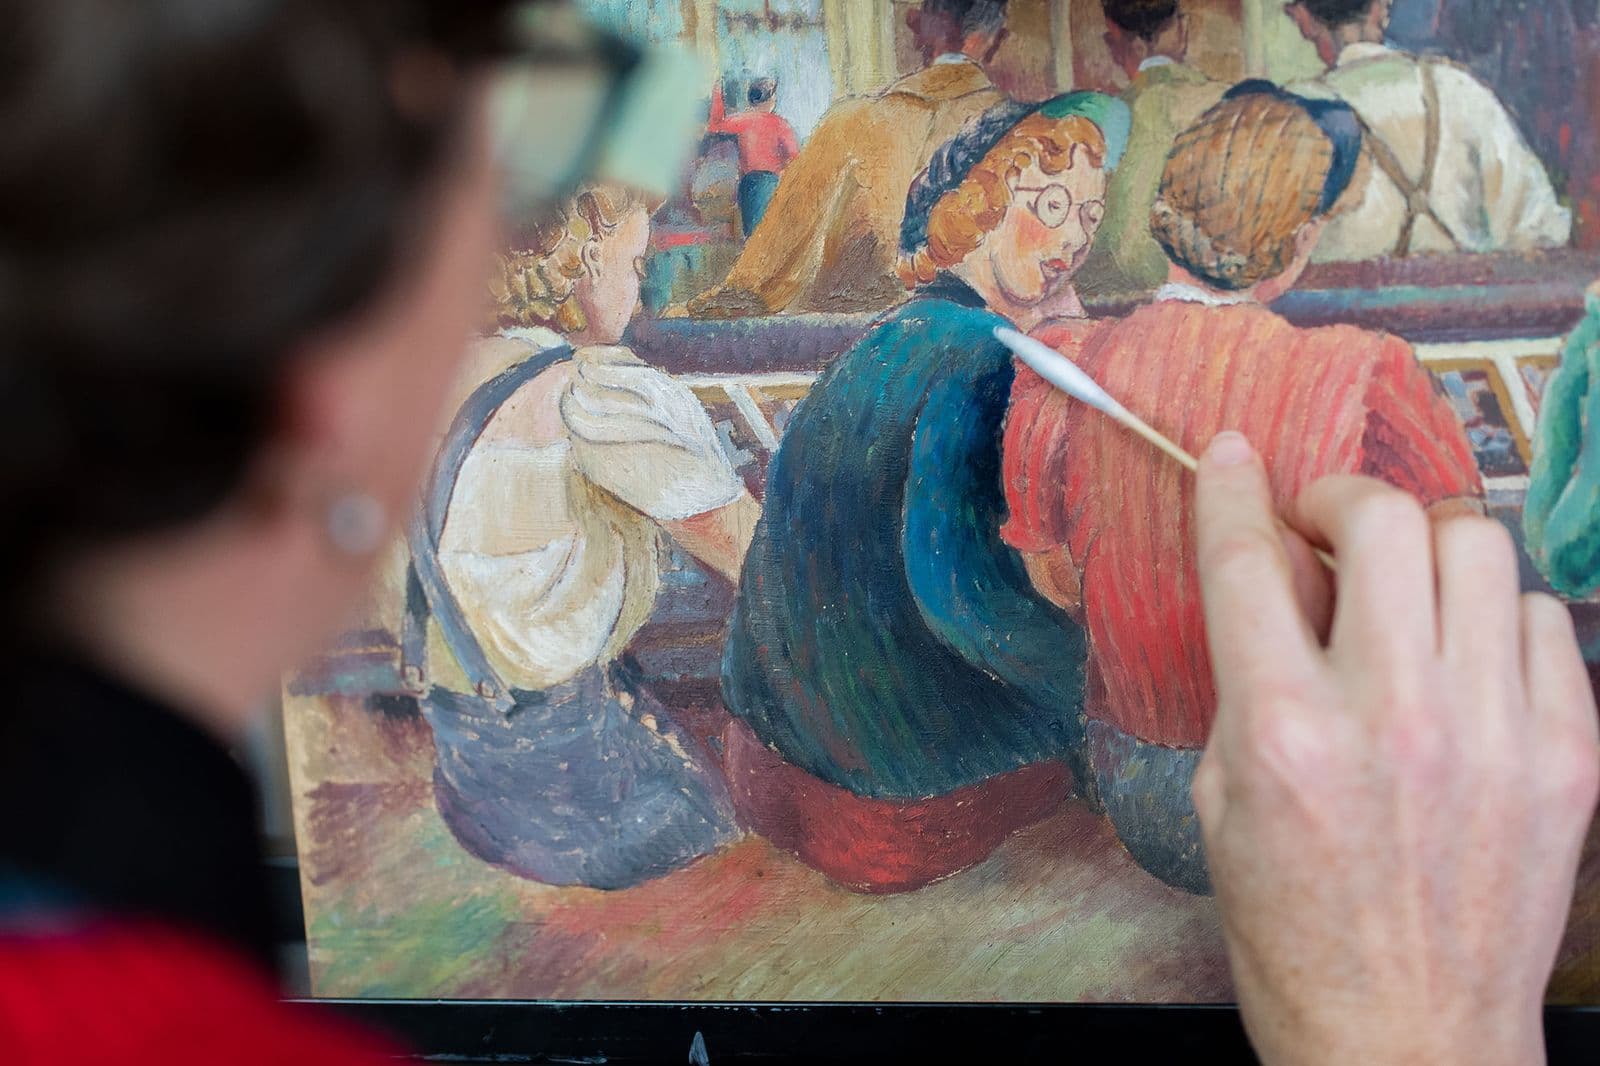 A woman uses a cotton bud to clean a painting